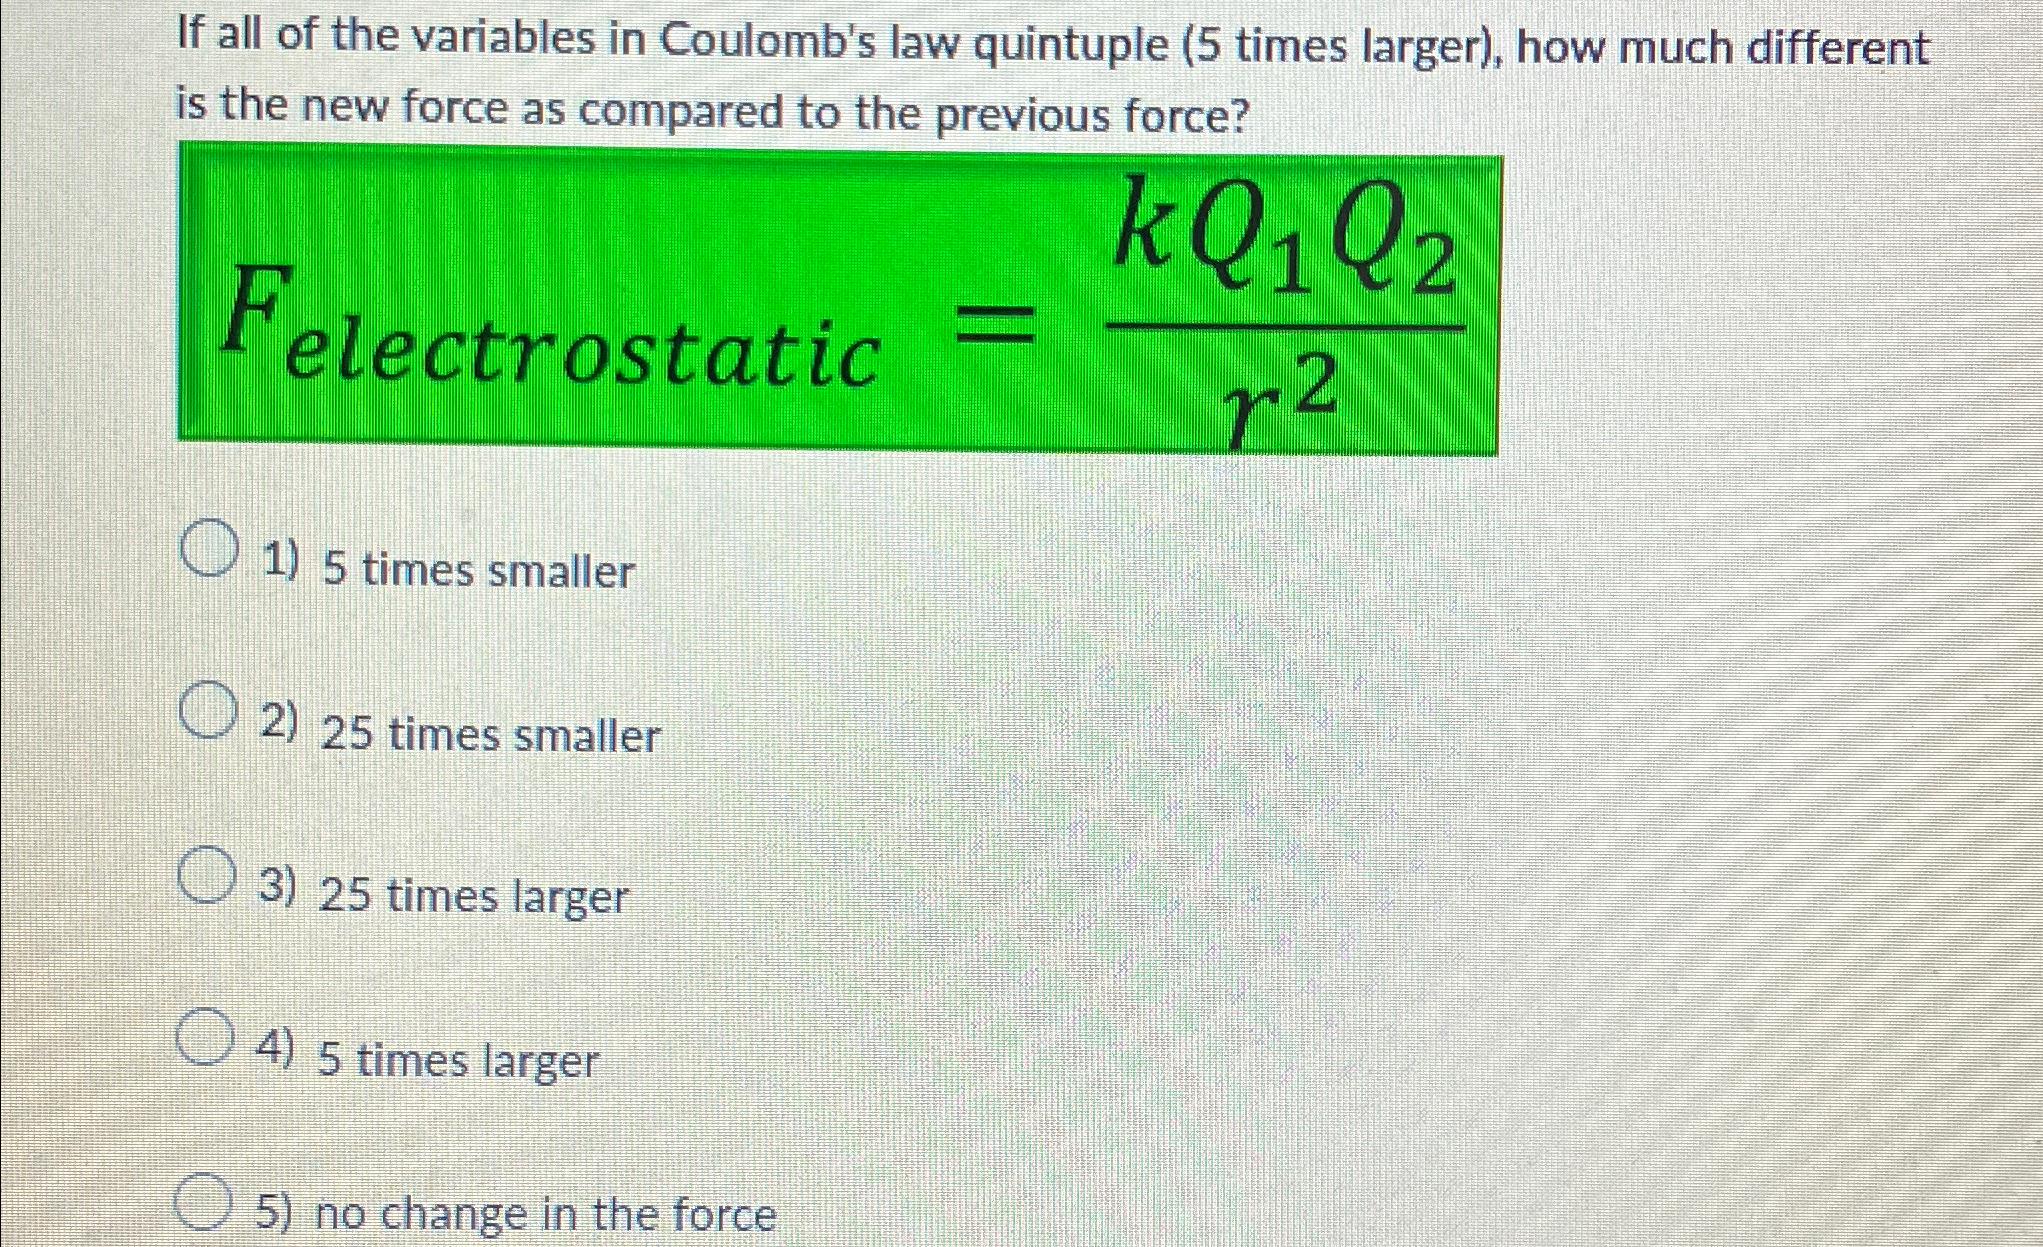 If all of the variables in Coulomb's law quintuple (5 times larger), how much different is the new force as